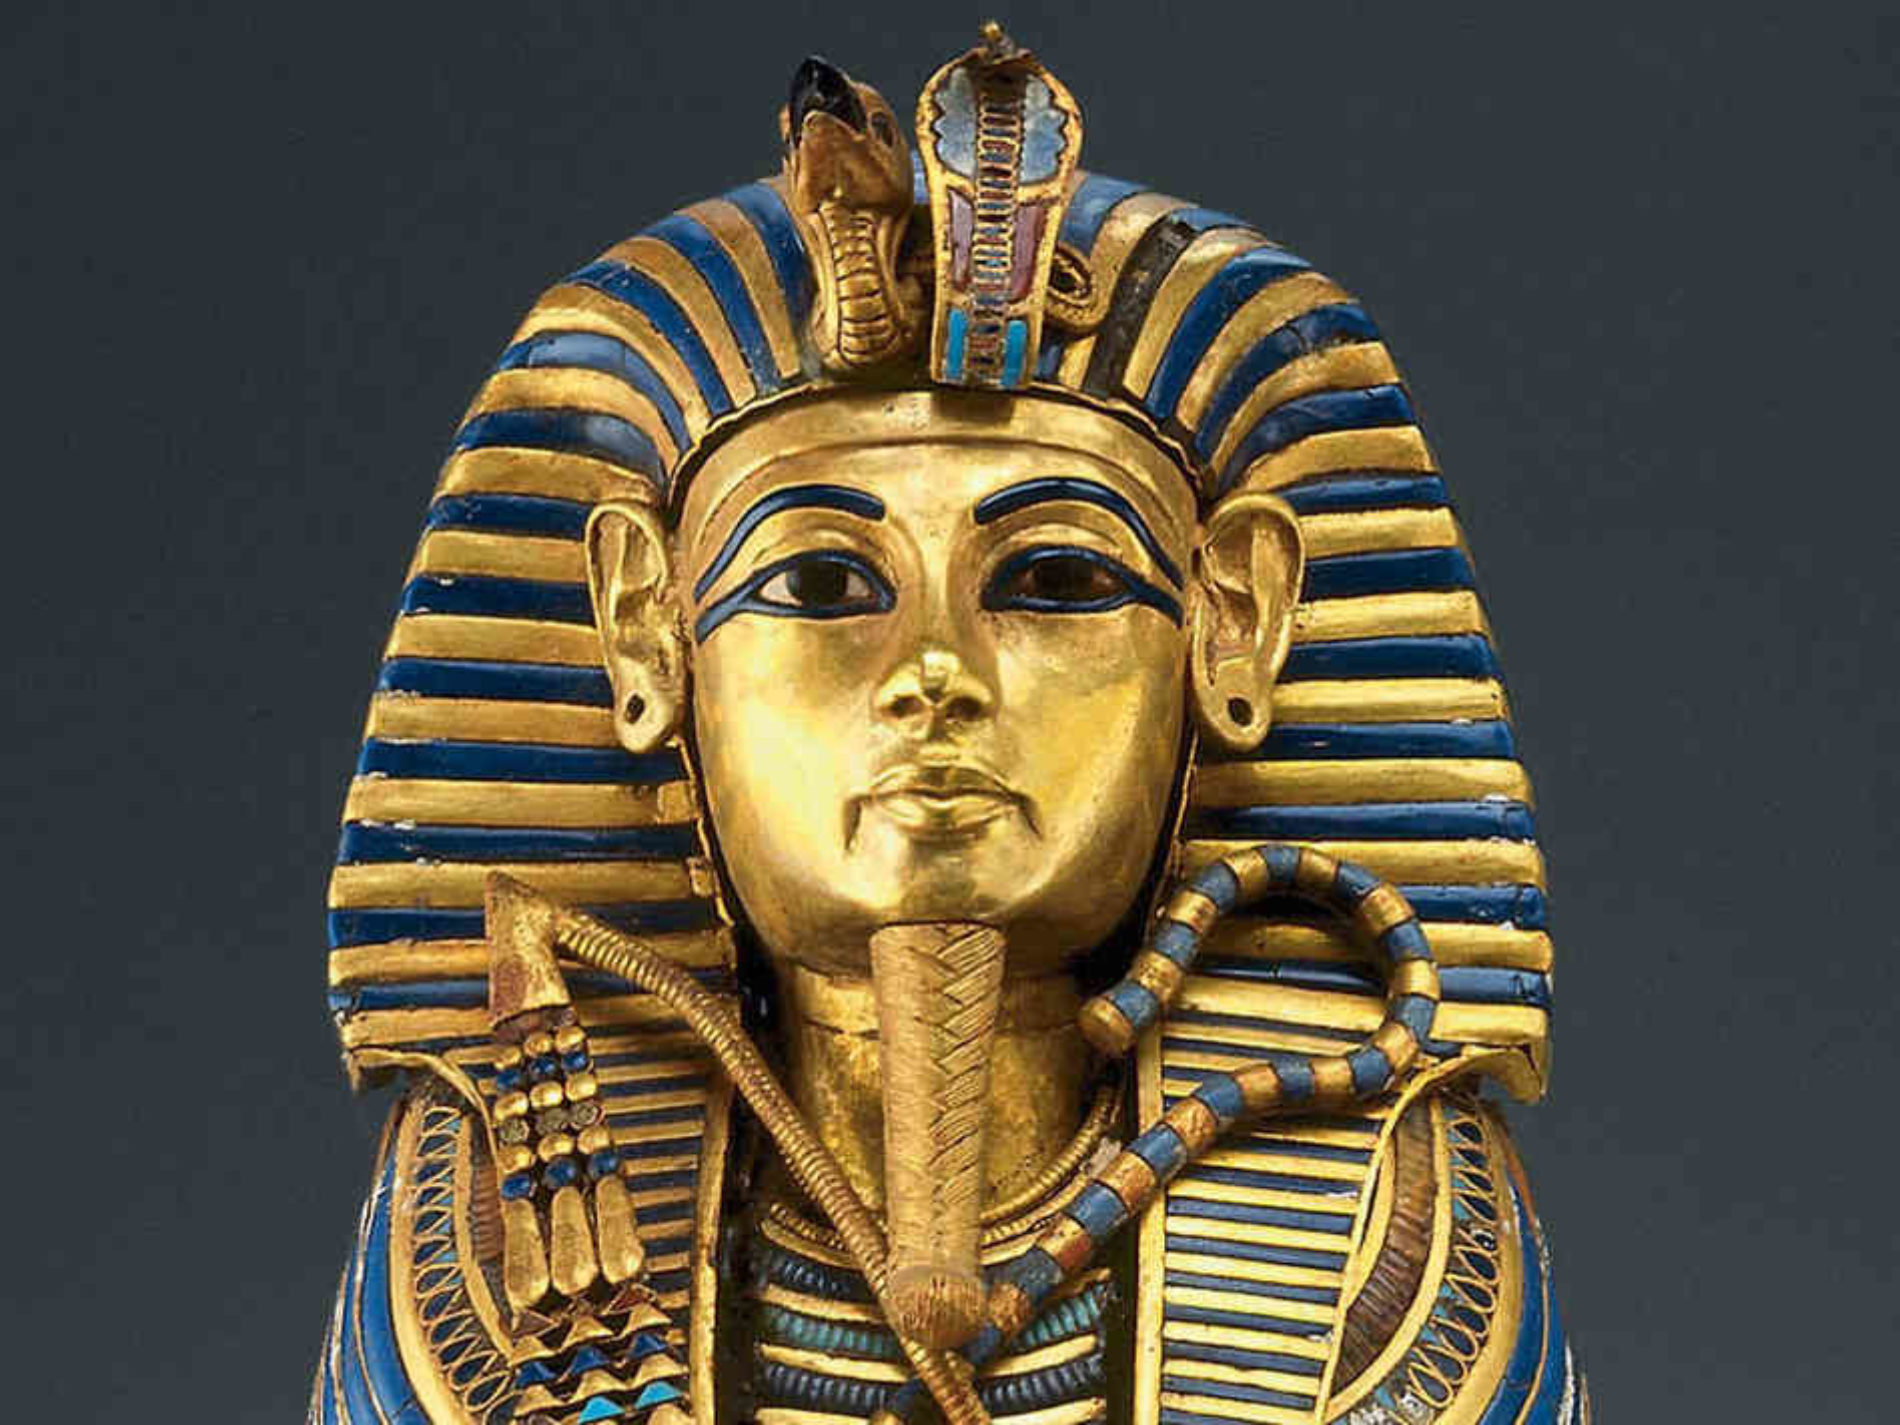 King Tut and His Weird Mummy by Olivia James, April 16, 2015 Google image from https://www.phactual.com/king-tut-and-his-weird-mummy/